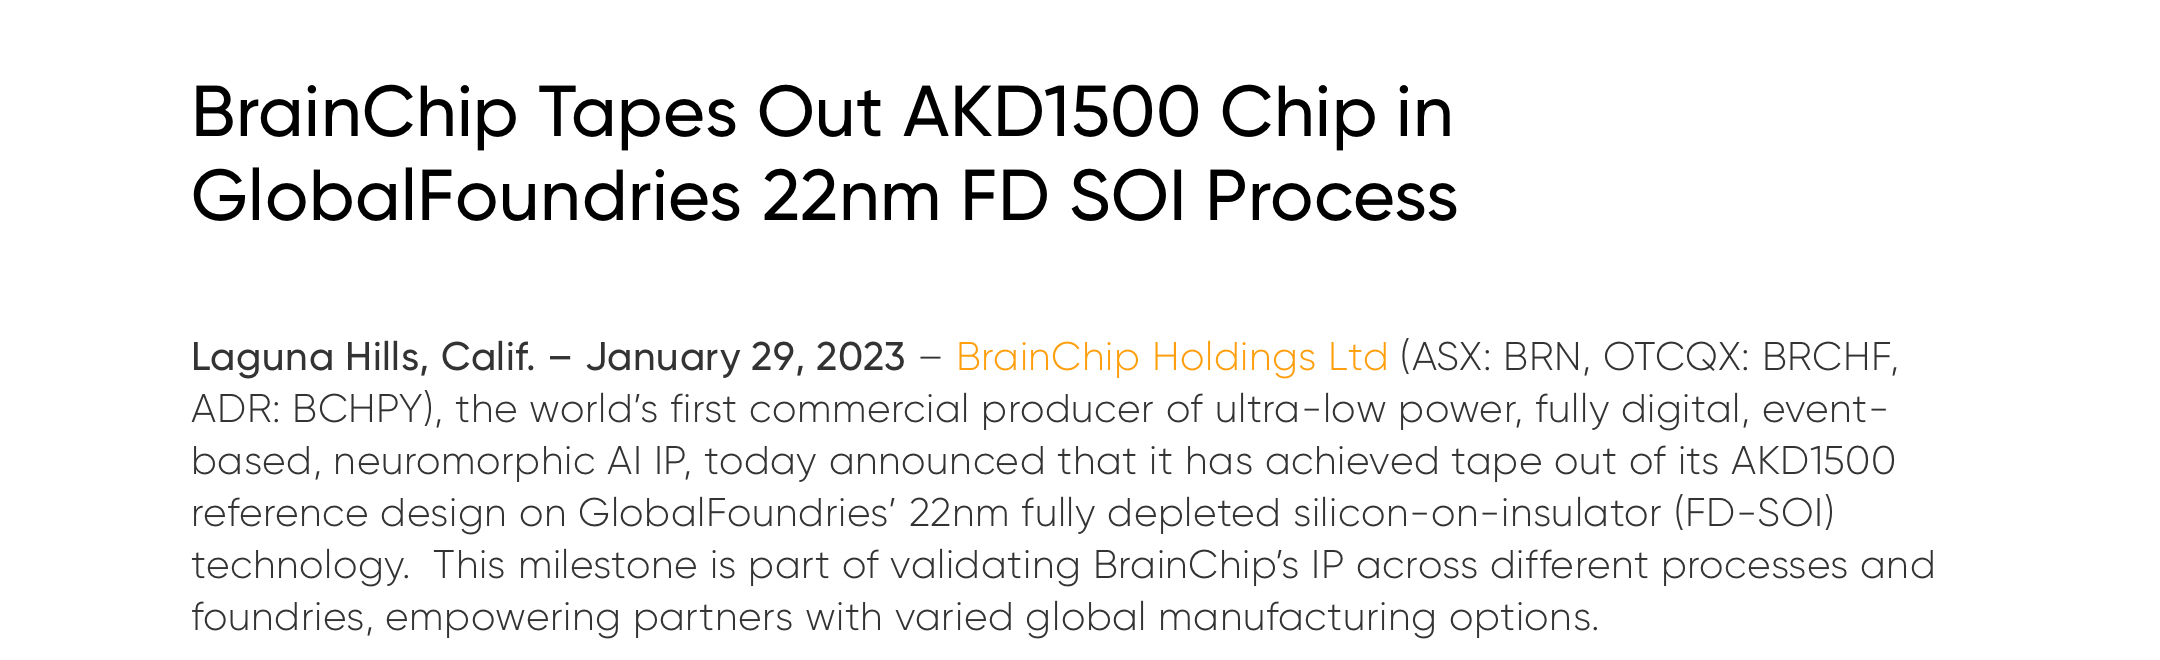 BrainChip Tapes Out AKD1500 Chip in GlobalFoundries 22nm FD SOI Process - BrainChip.png